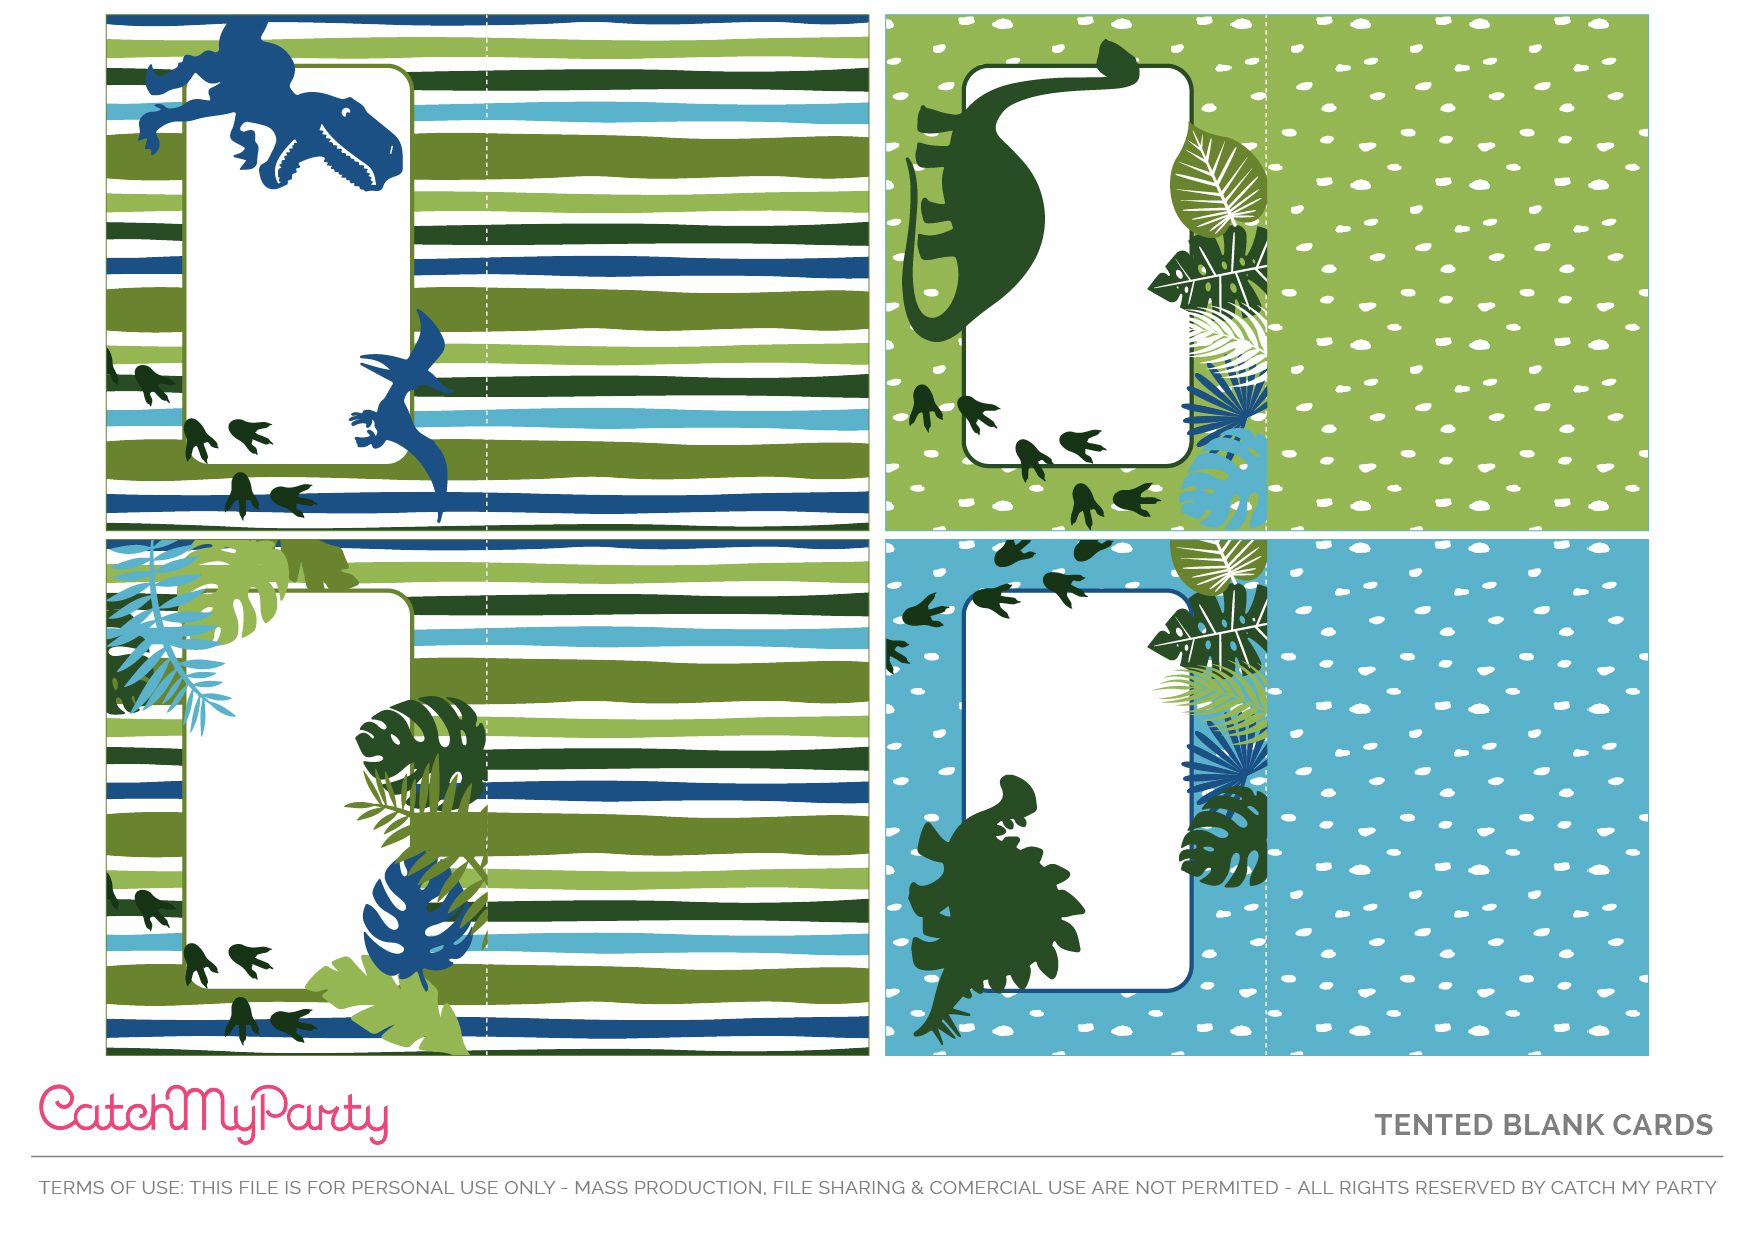 Download These Free Dinosaur Party Printables - Blank Tented Cards